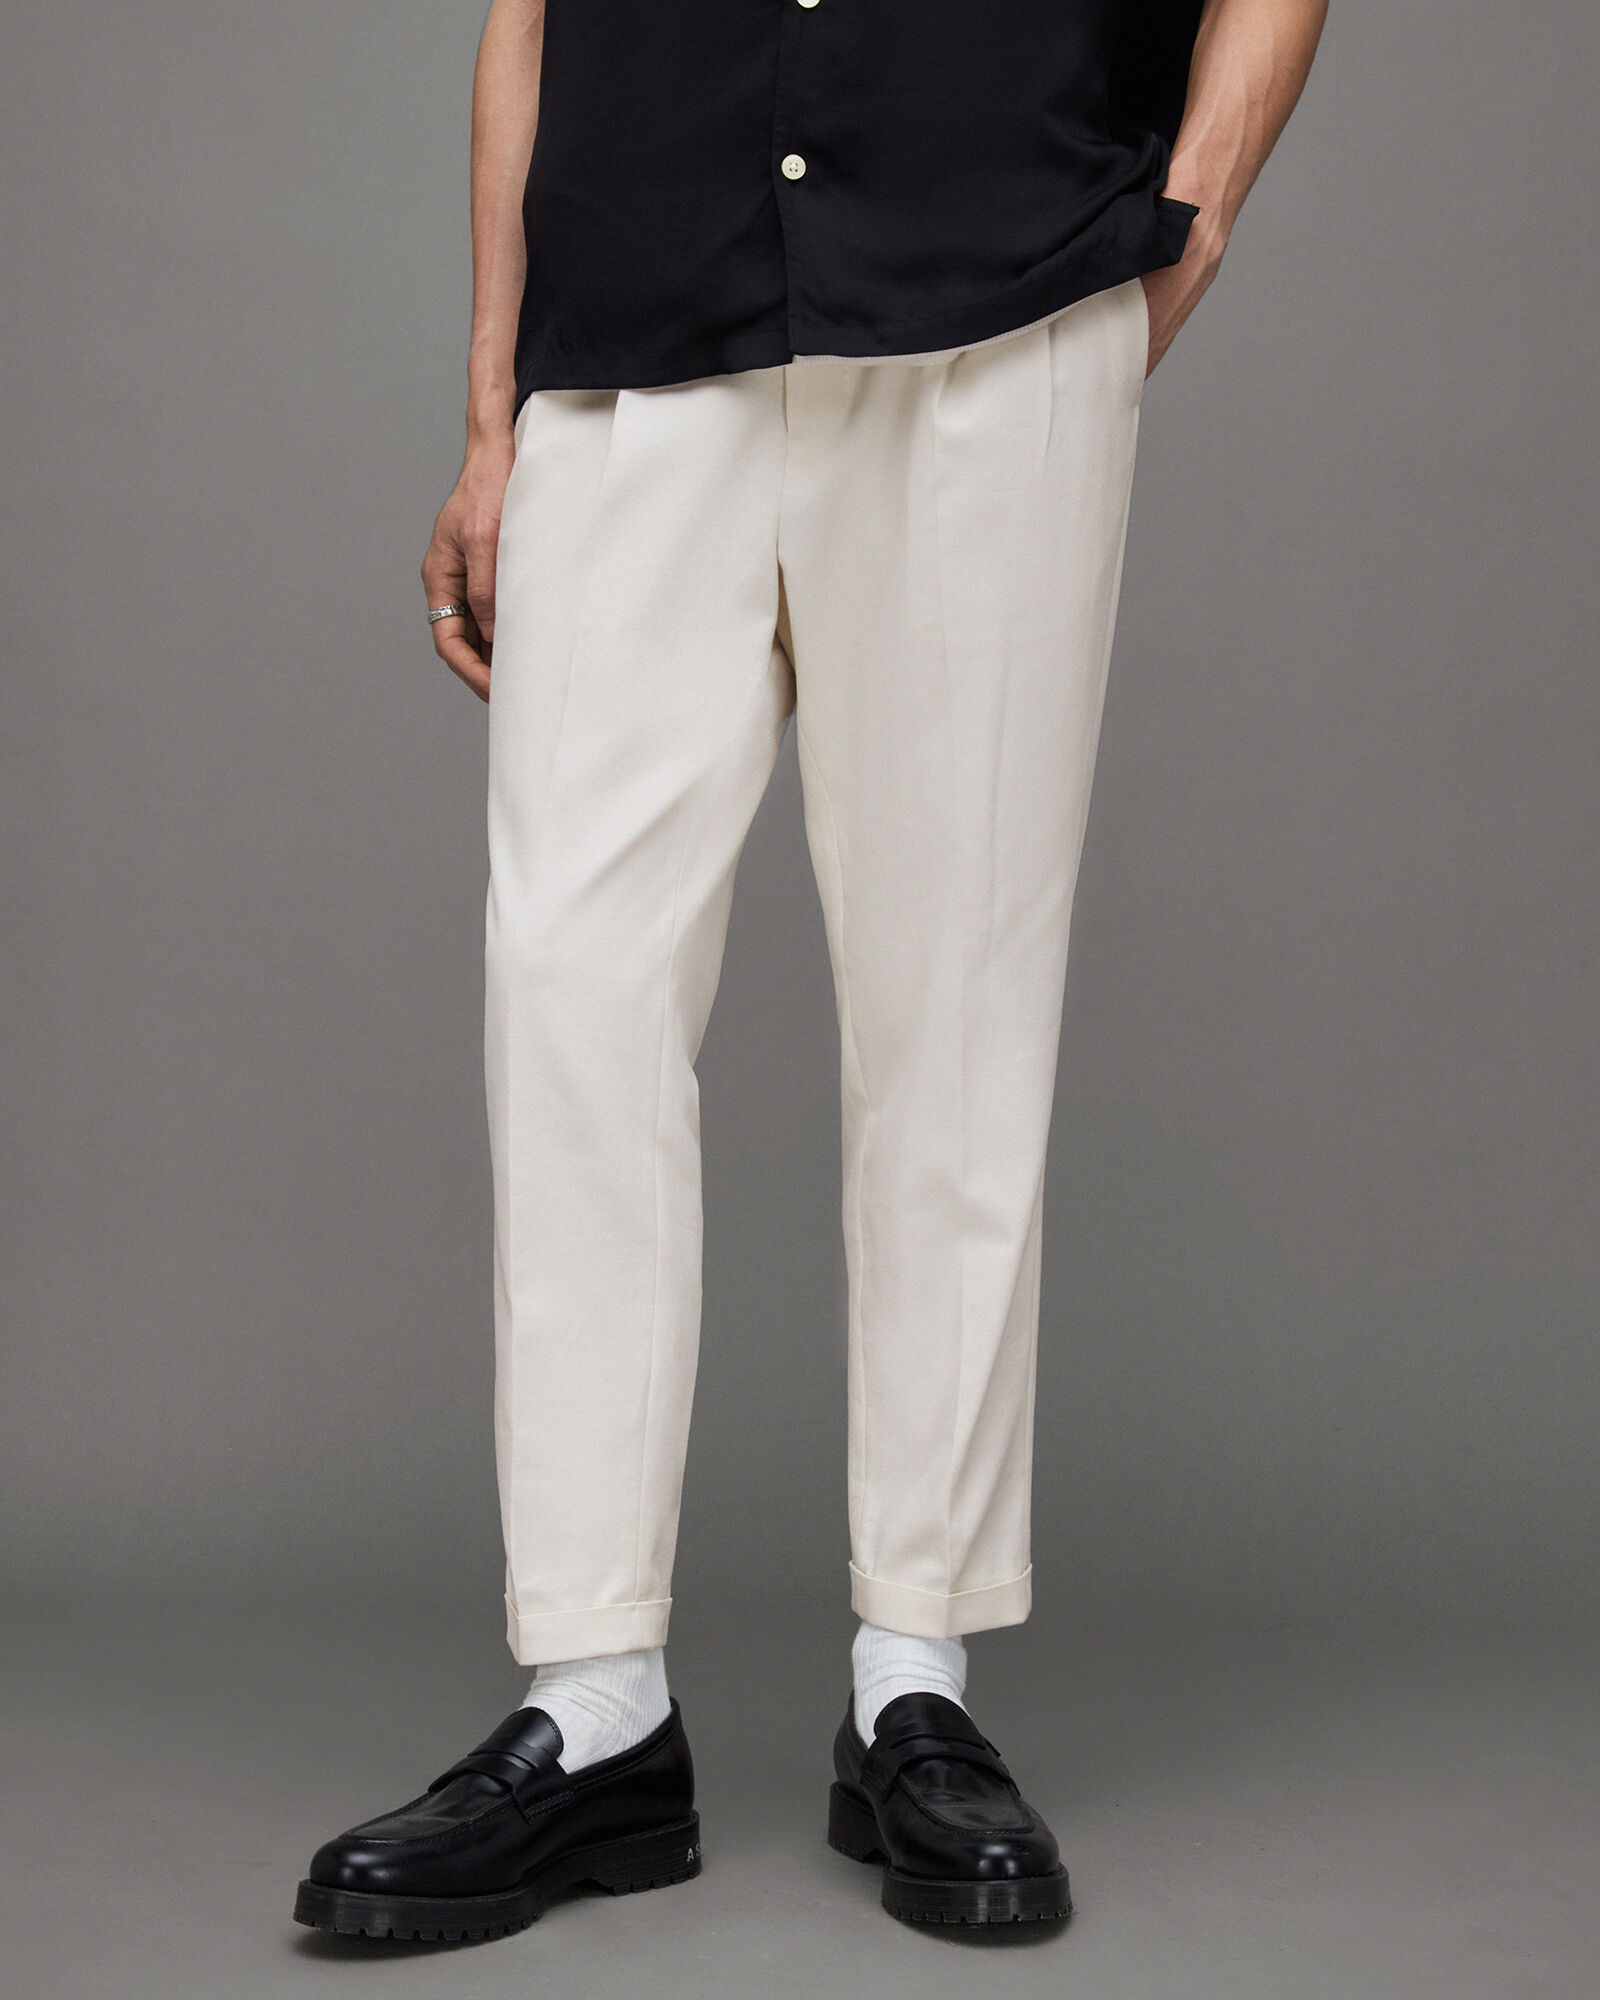 Harry Brown Slim Trousers outlet  Men  1800 products on sale   FASHIOLAcouk